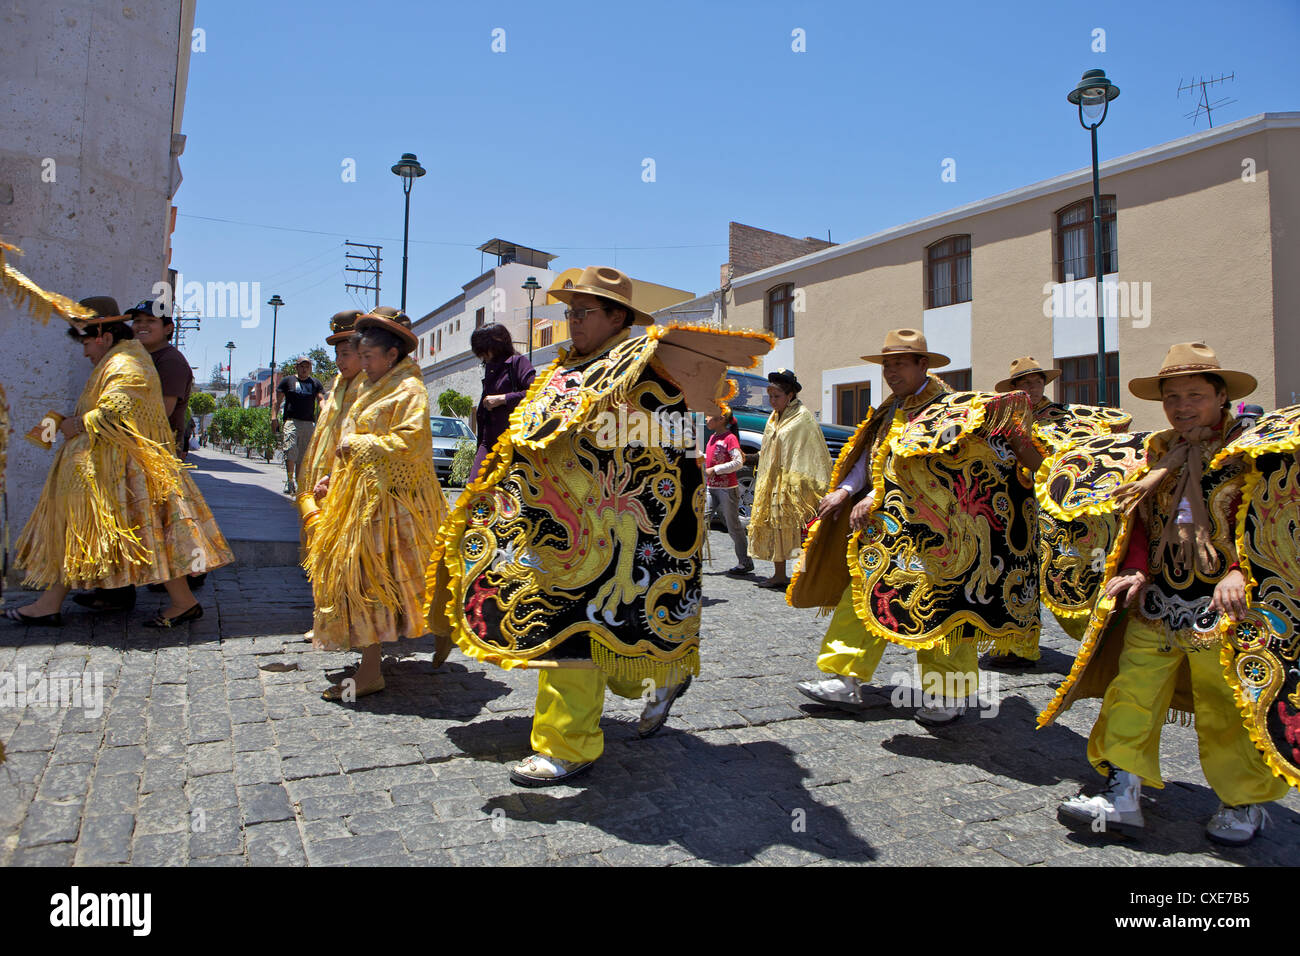 Wedding procession with traditionally dressed Peruvians, Arequipa, peru, South America Stock Photo